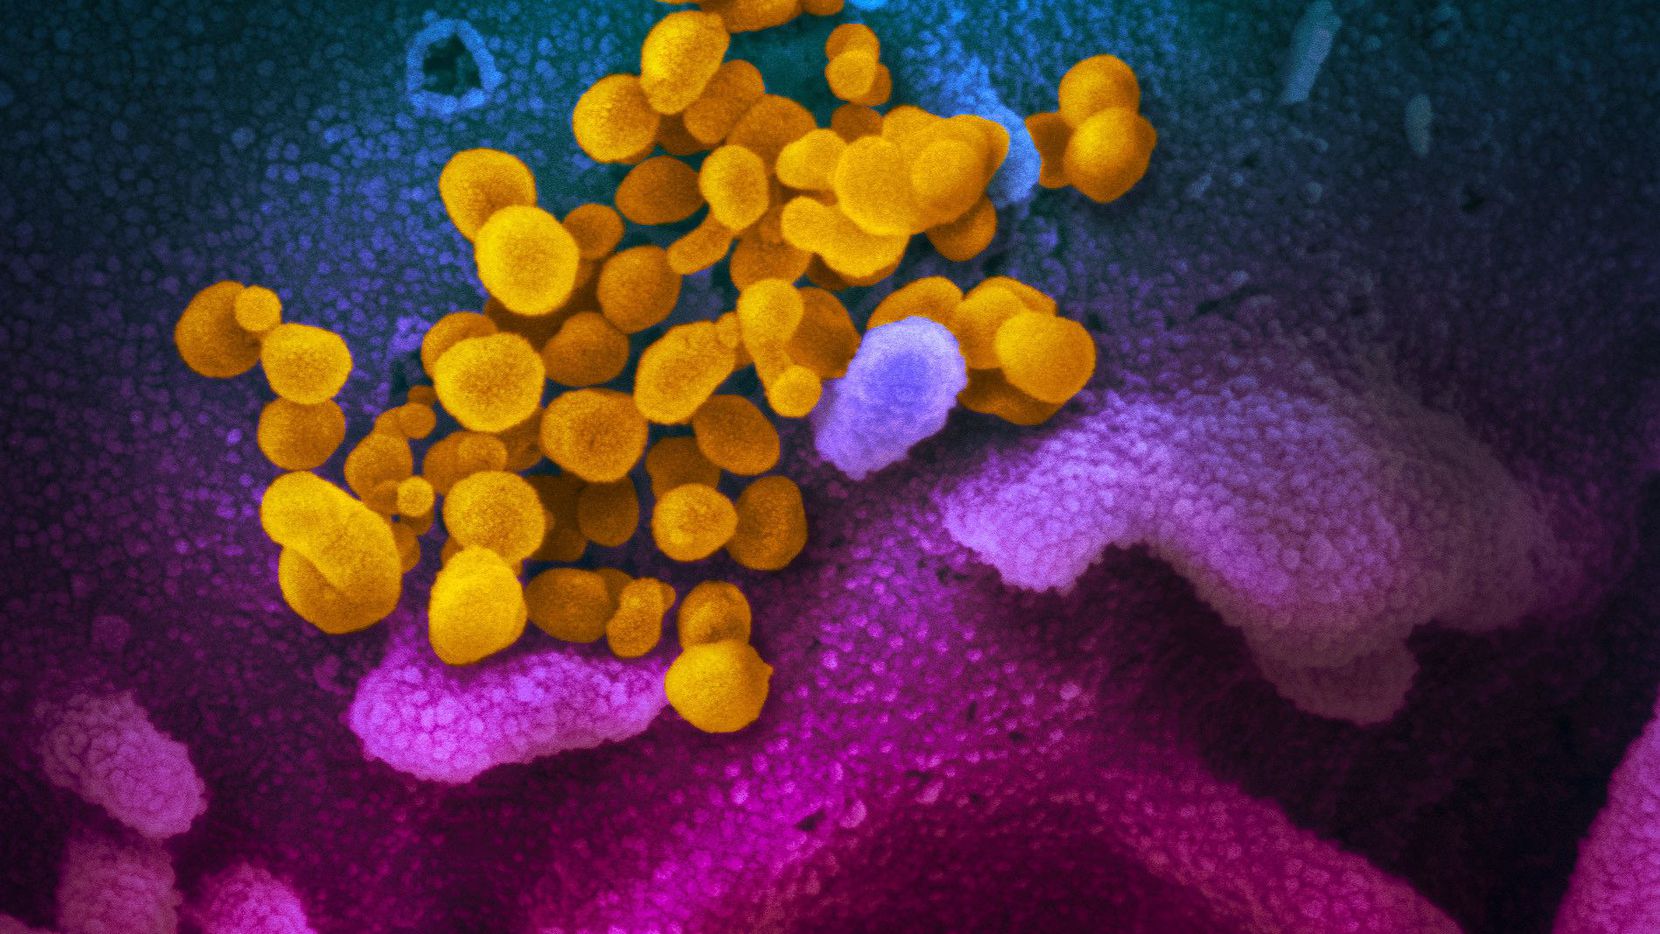 This file photo courtesy of the National Institutes of Health shows SARS-CoV-2 also known as 2019-nCoV, the virus that causes COVID-19.